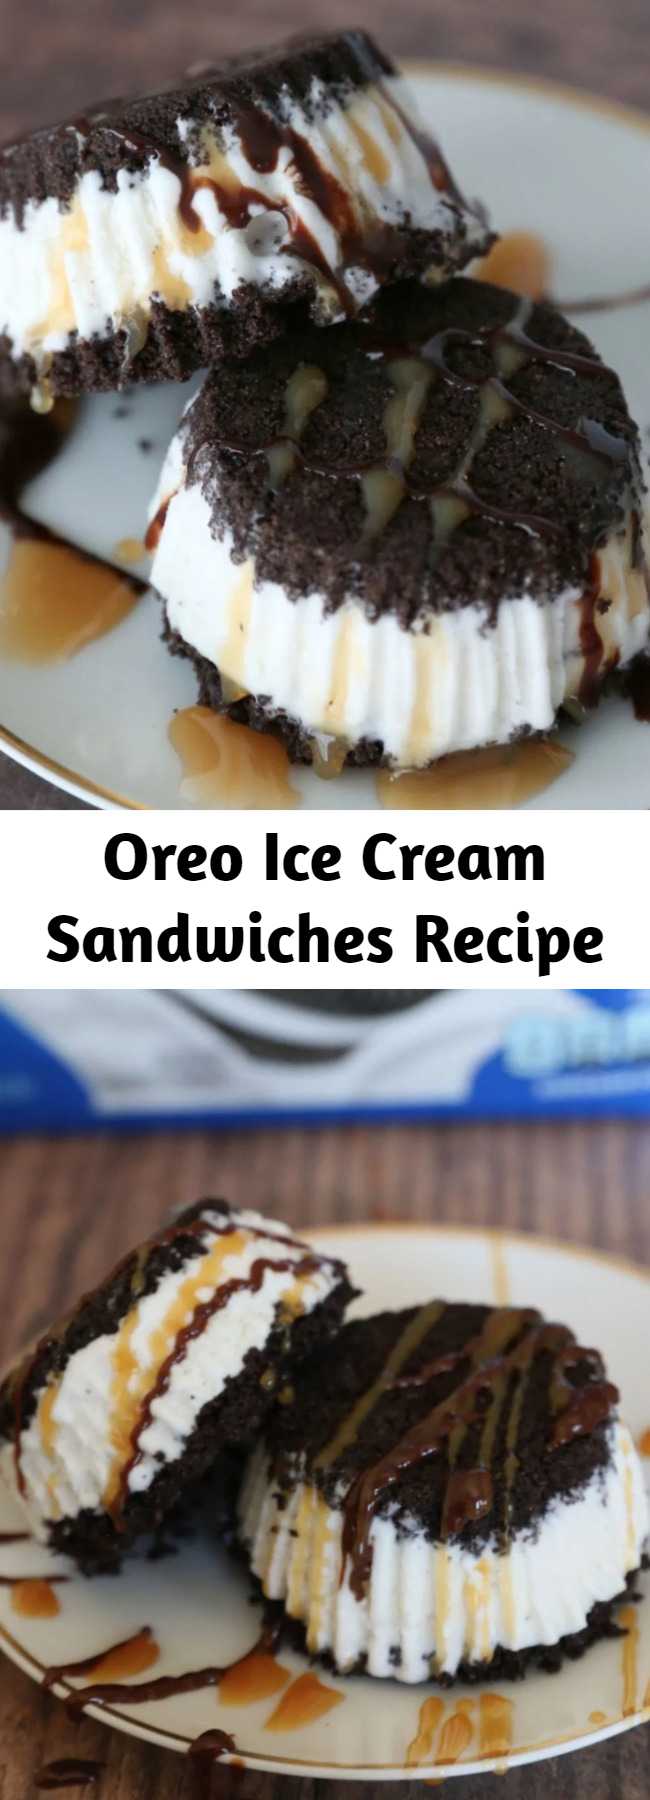 Oreo Ice Cream Sandwiches Recipe - Creamy ice cream is sandwiched between two thick layers of Oreo cookie crust in this delicious frozen dessert.